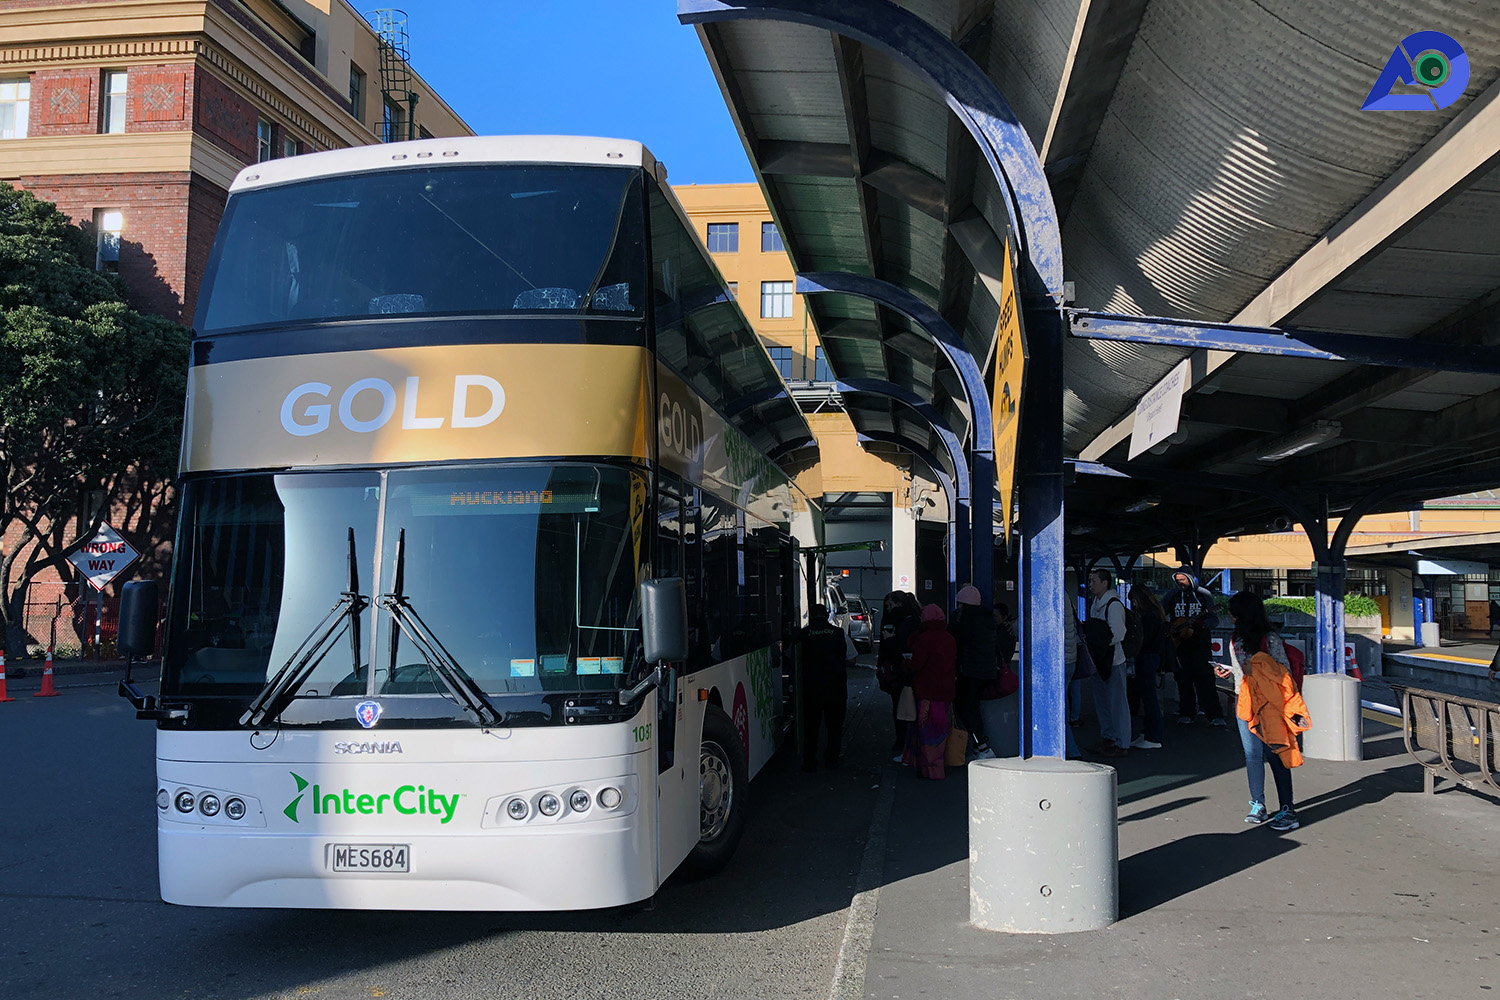 5 Reasons Why You Must Use InterCity's FlexiPass In New Zealand